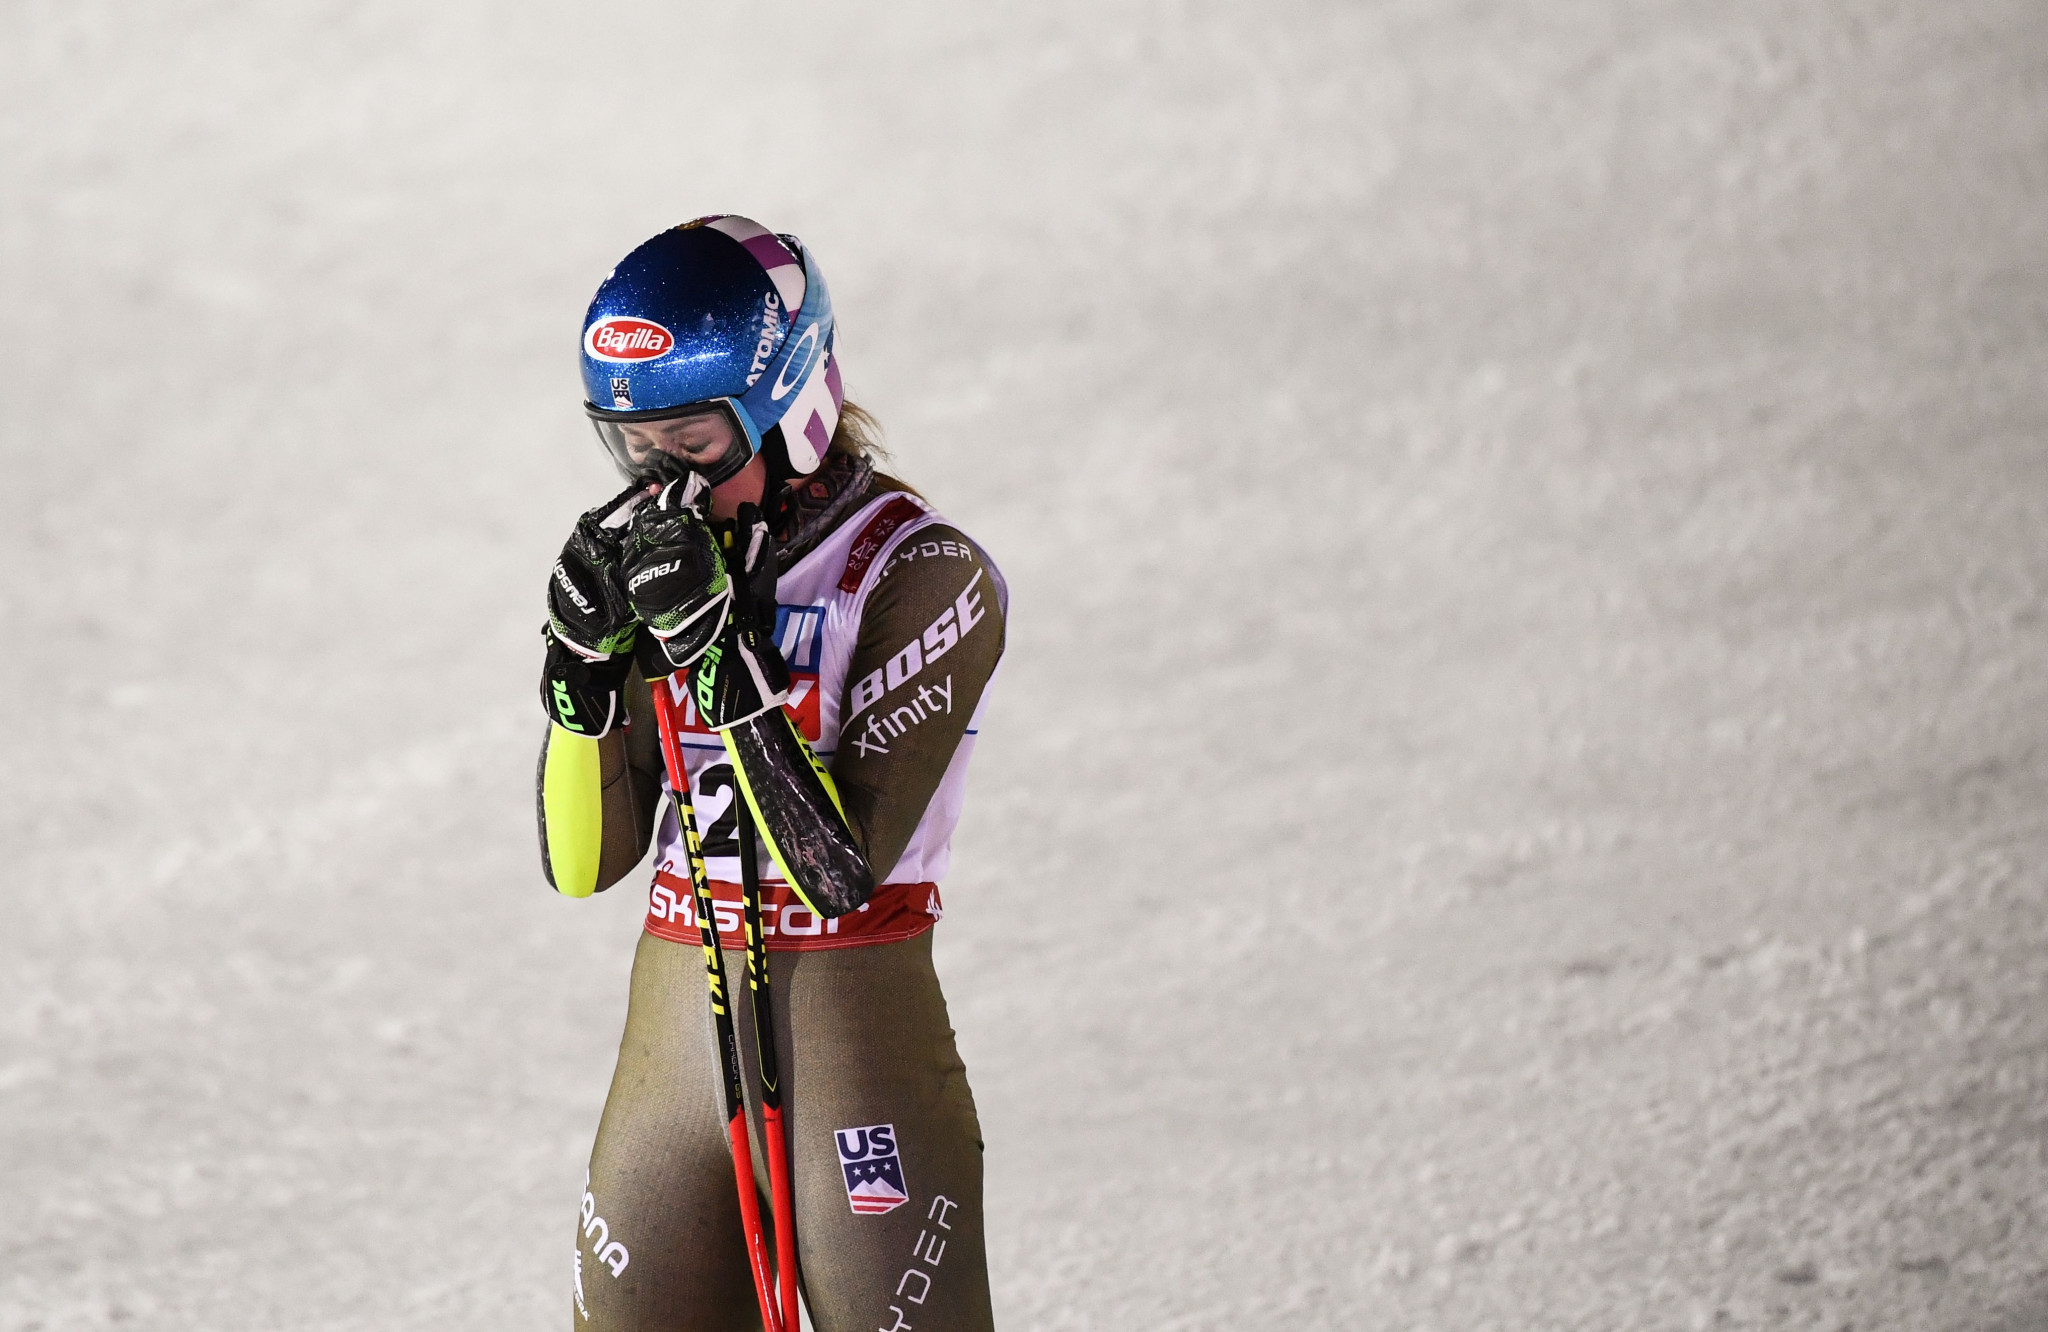 Fifty-six time World Cup winner Mikaela Shiffrin started the second run in fourth and could only make up one place ©Getty Images